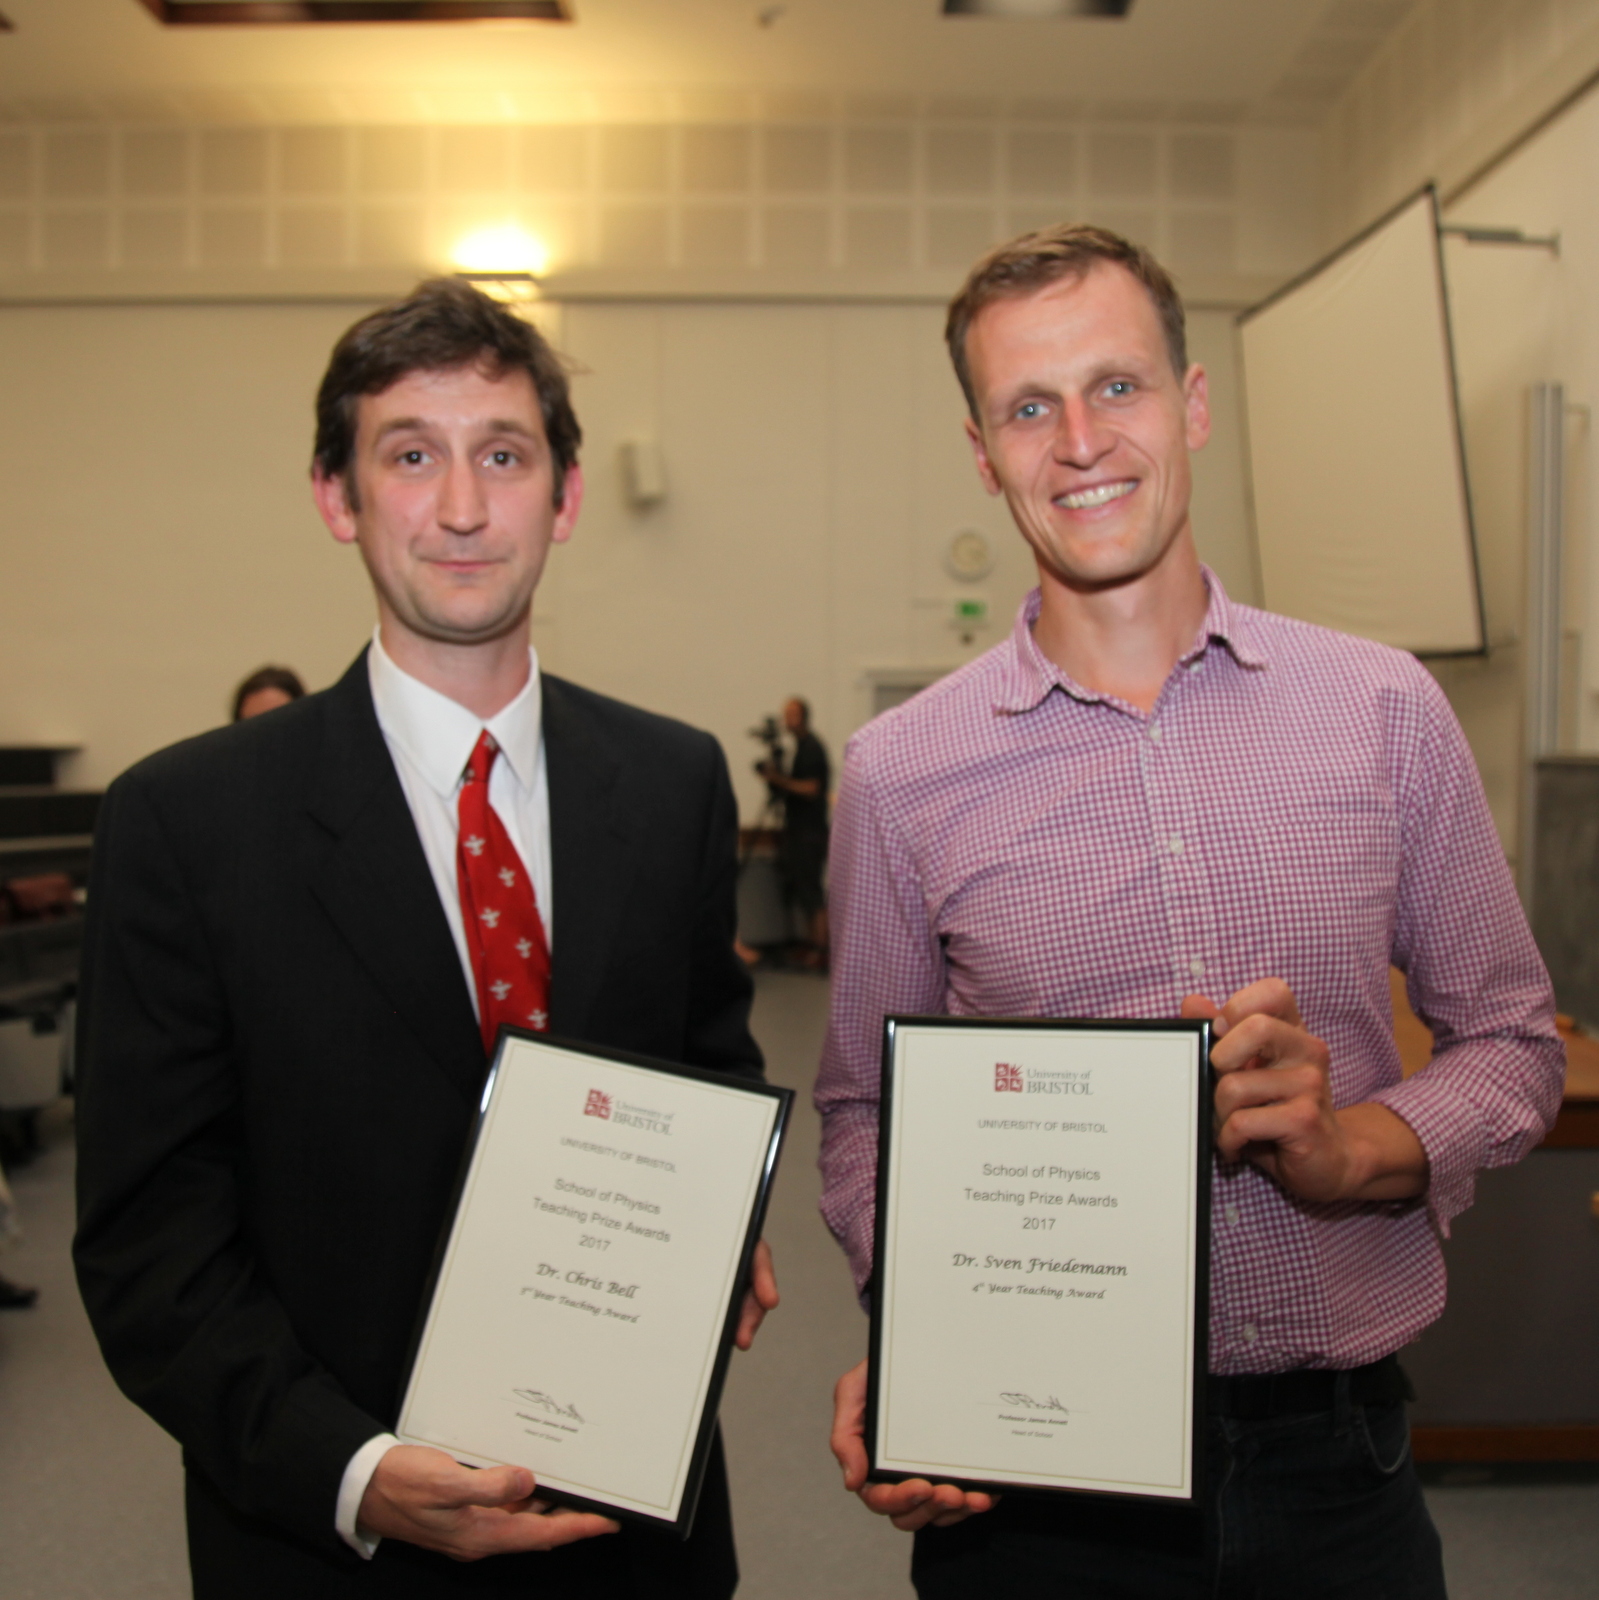 Teaching Prize for Chris Bell and Sven Friedemann